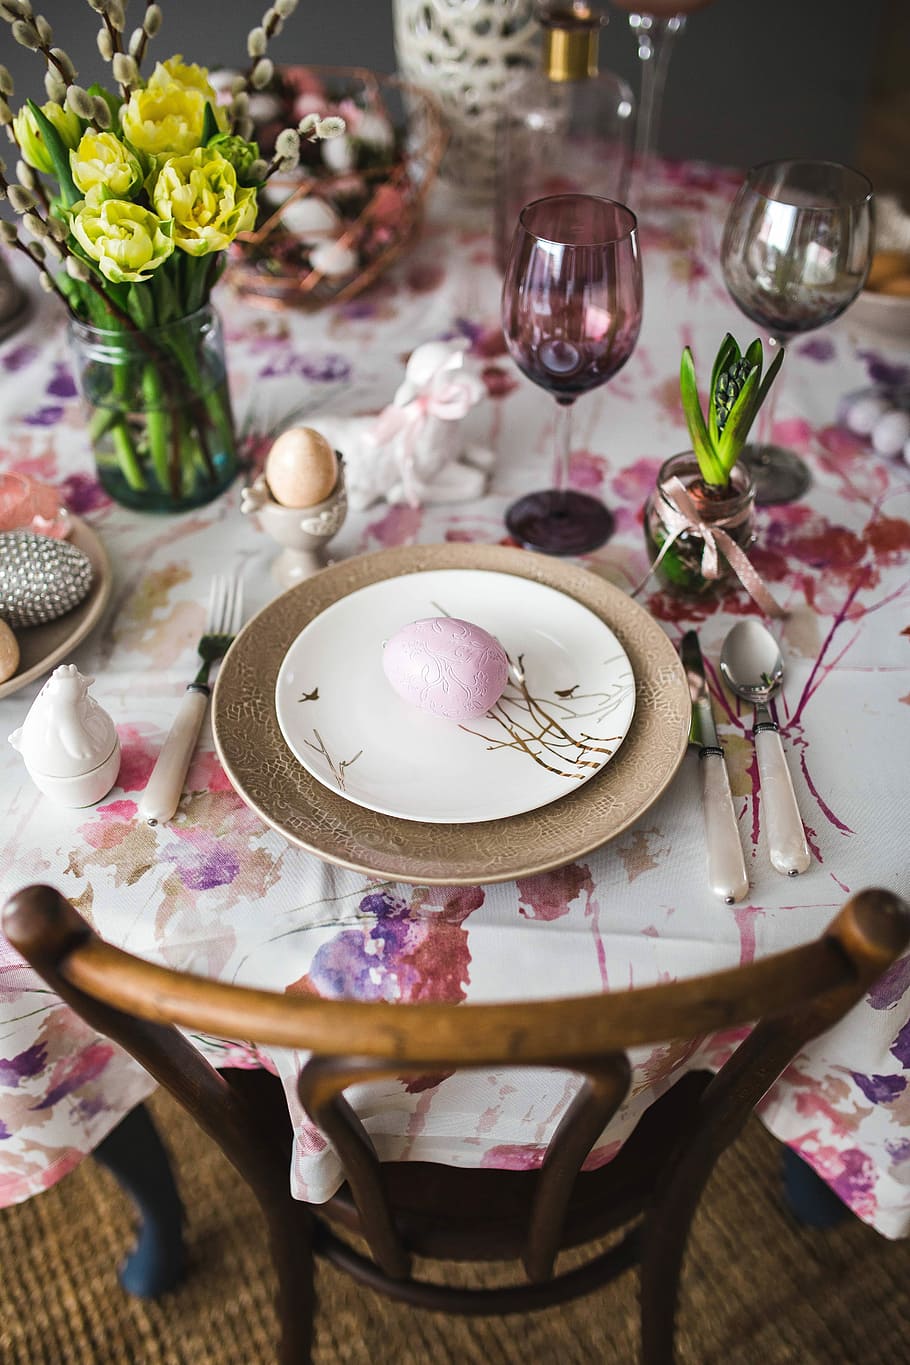 cute, pink, decorations, flowers, catkins, eggs, Easter table, table, sweet, holidays